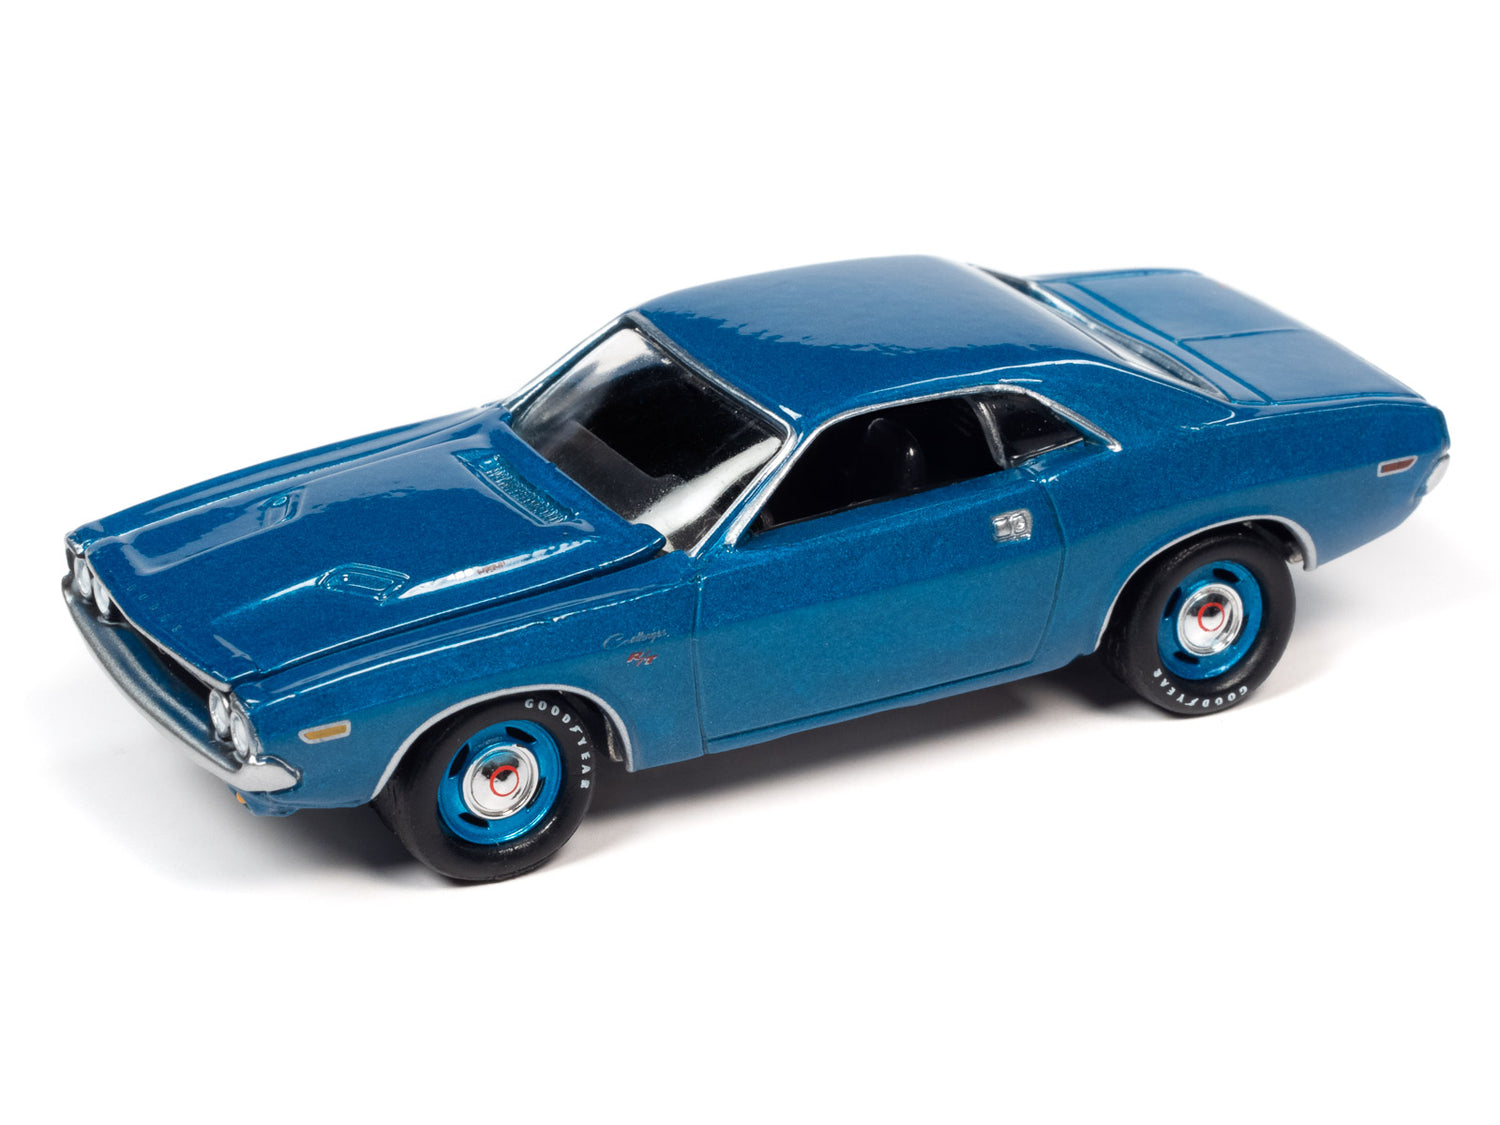 Johnny Lightning 1970 Dodge Challenger R/T (B5 Bright Blue) with Collector Tin 1:64 Diecast